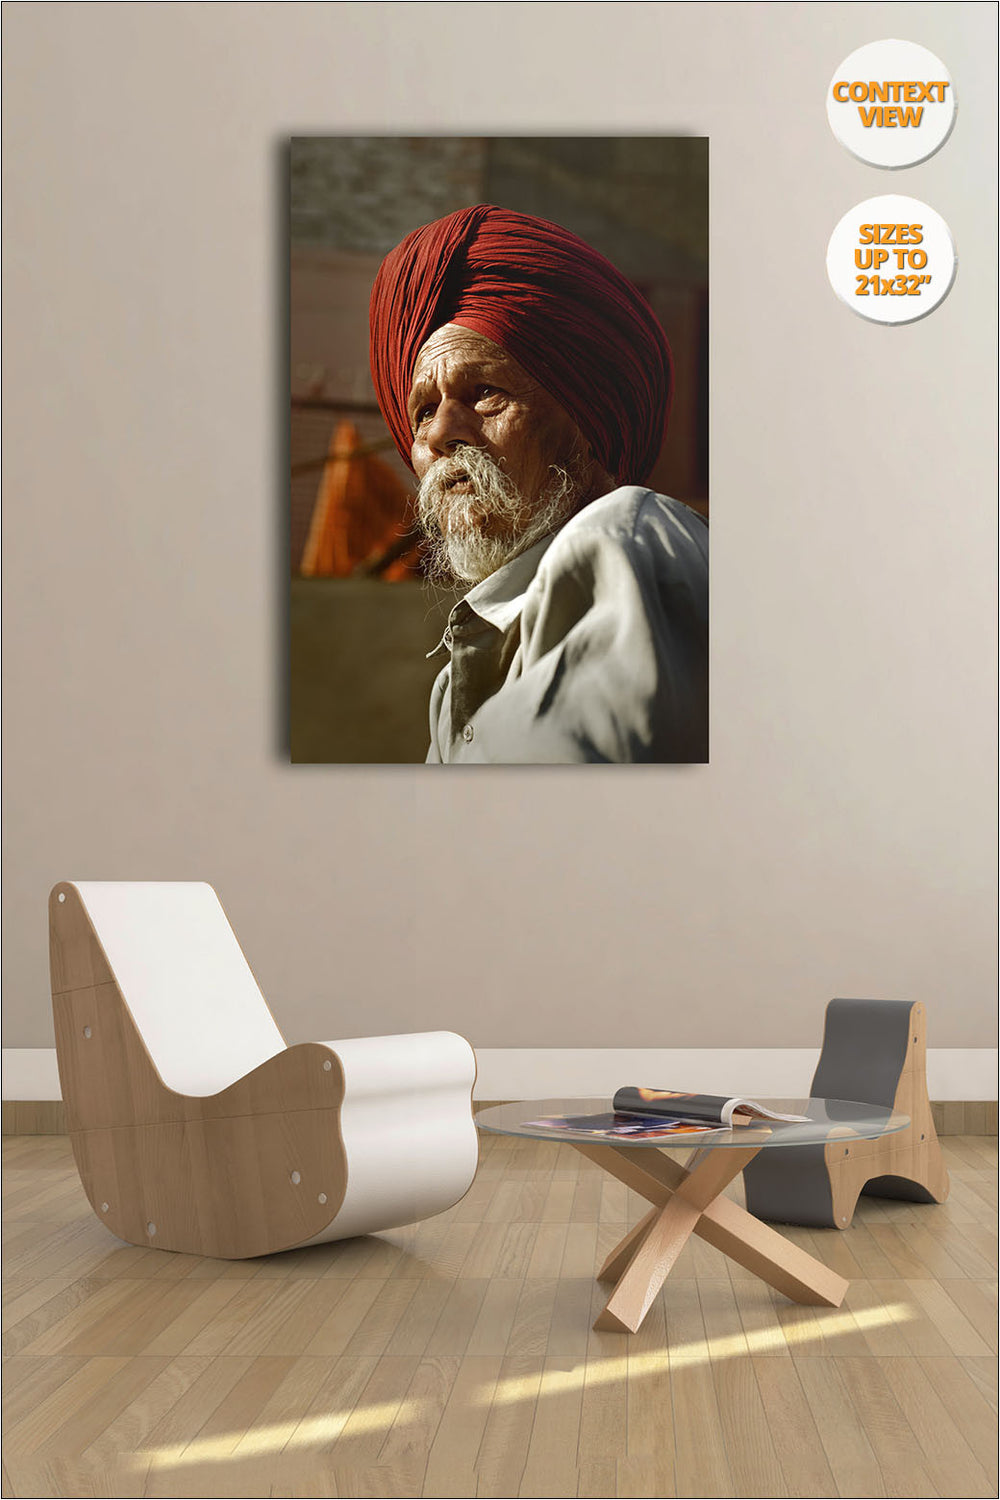 Portrait of a Sikh, Chandigarh, India. | View of the Print hanged in Living Room.